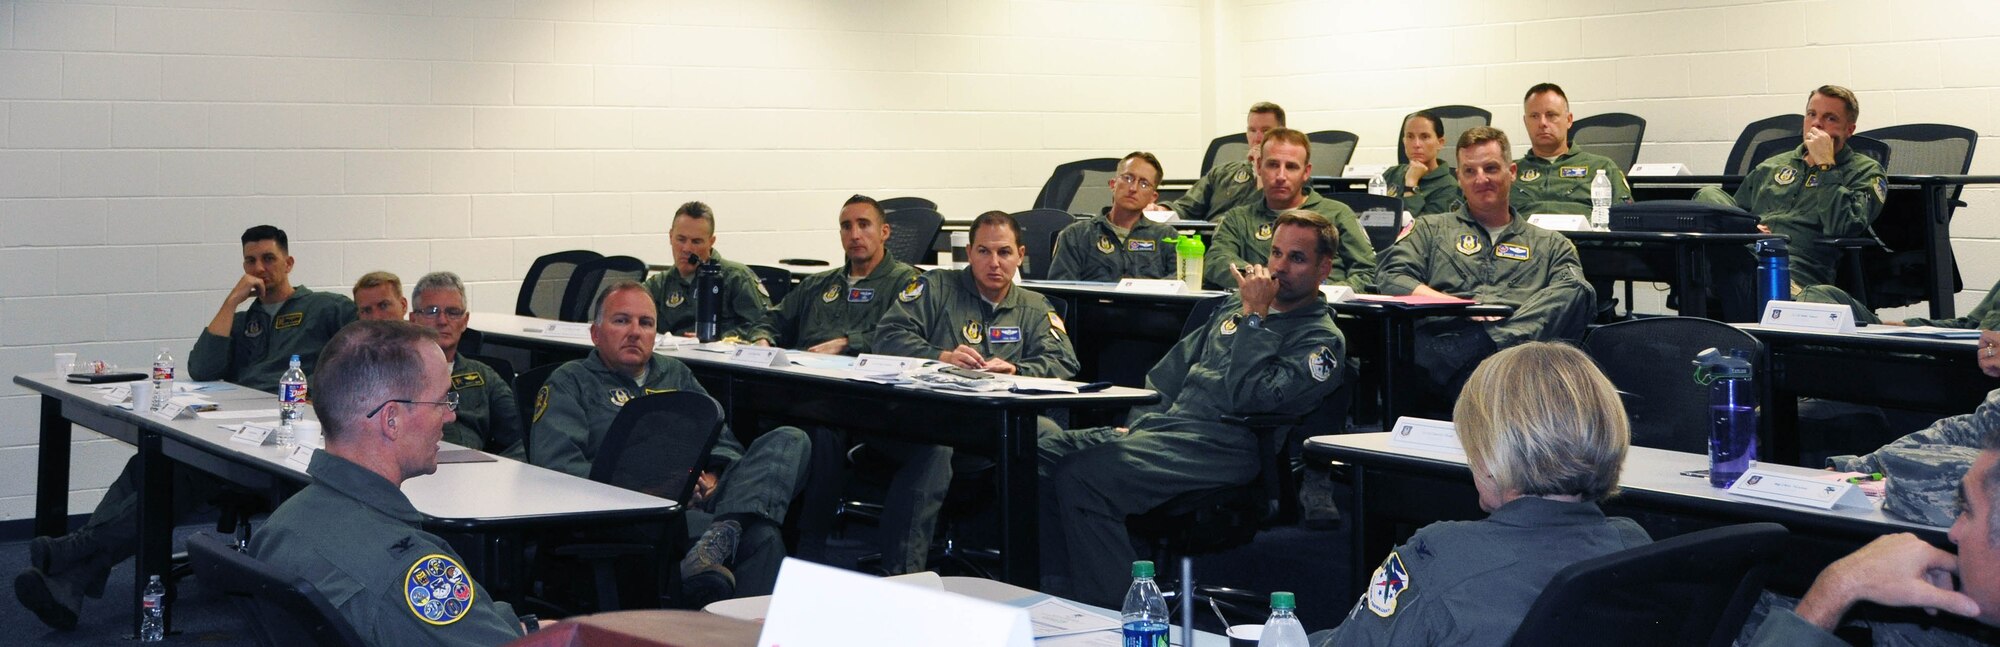 Col. Roger Suro, 340th Flying Training Group commander, briefs commanders at the Group's annual fall commanders summit at Joint Base San Antonio-Randolph, Texas. Photo by Janis El Shabazz